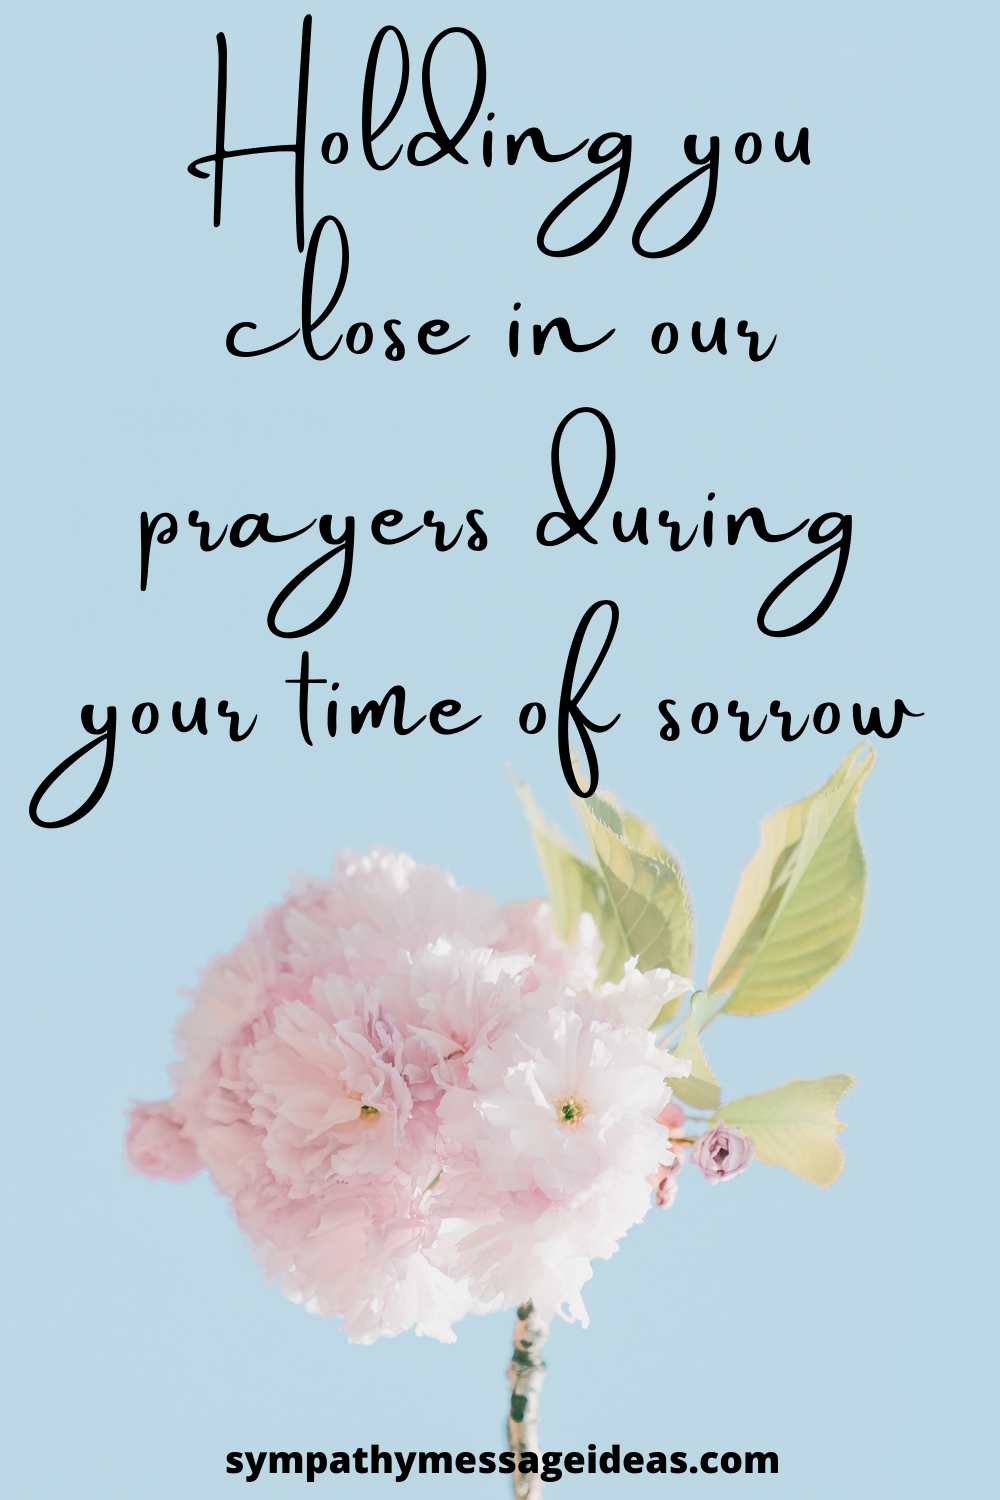 Sympathy Image with Heartfelt Quotes Card Messages